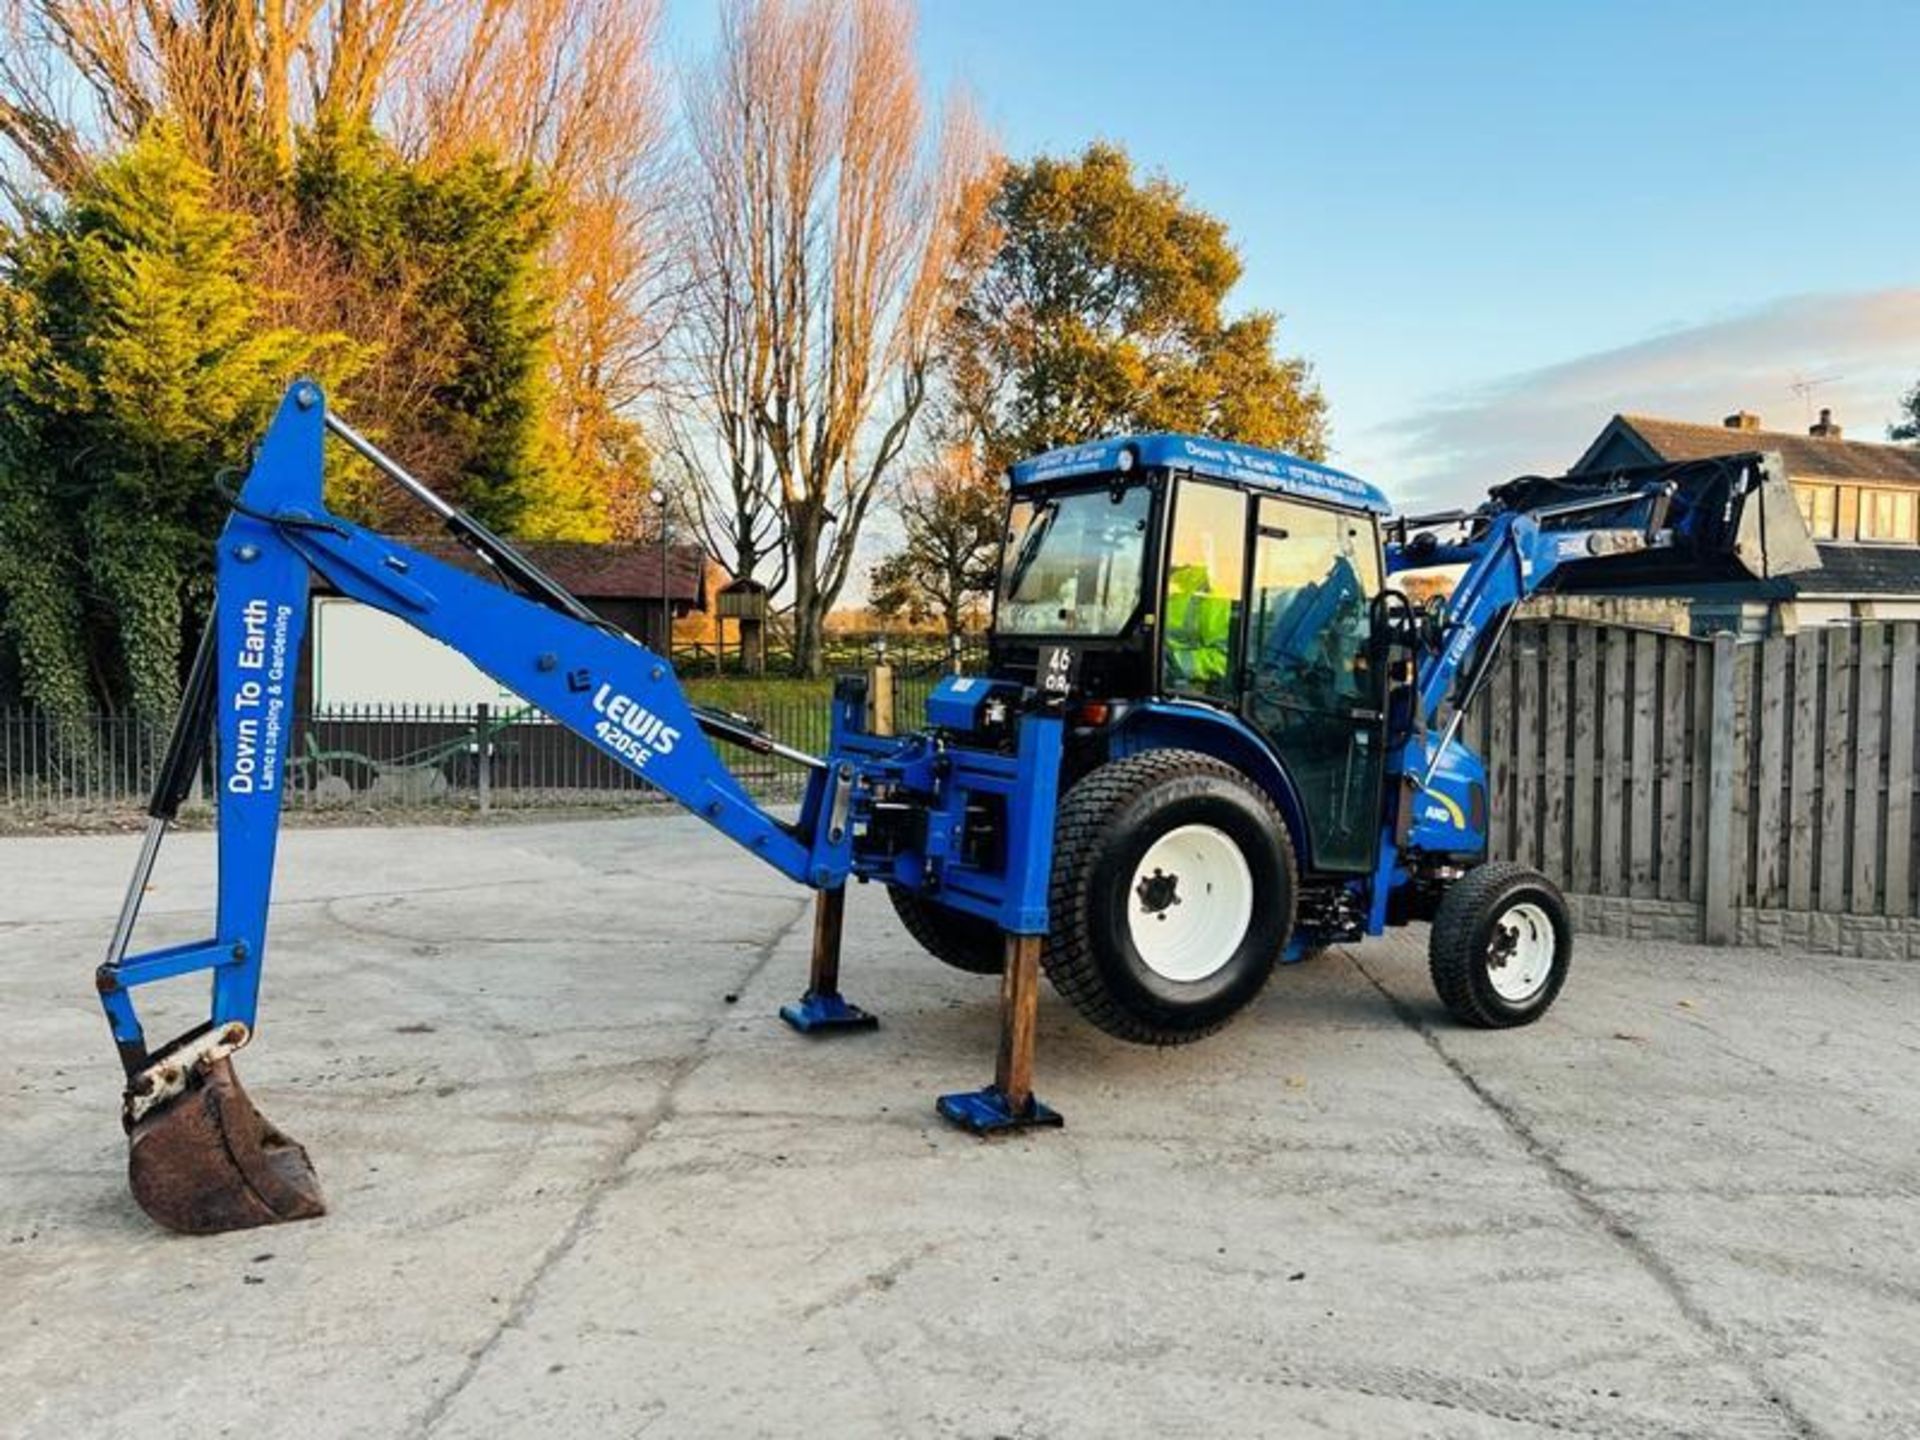 NEW HOLLAND BOOMER 40 4WD TRACTOR *YEAR 2014, ONLY 737 HRS* C/W LOADER & BACK TACTOR - Image 7 of 19